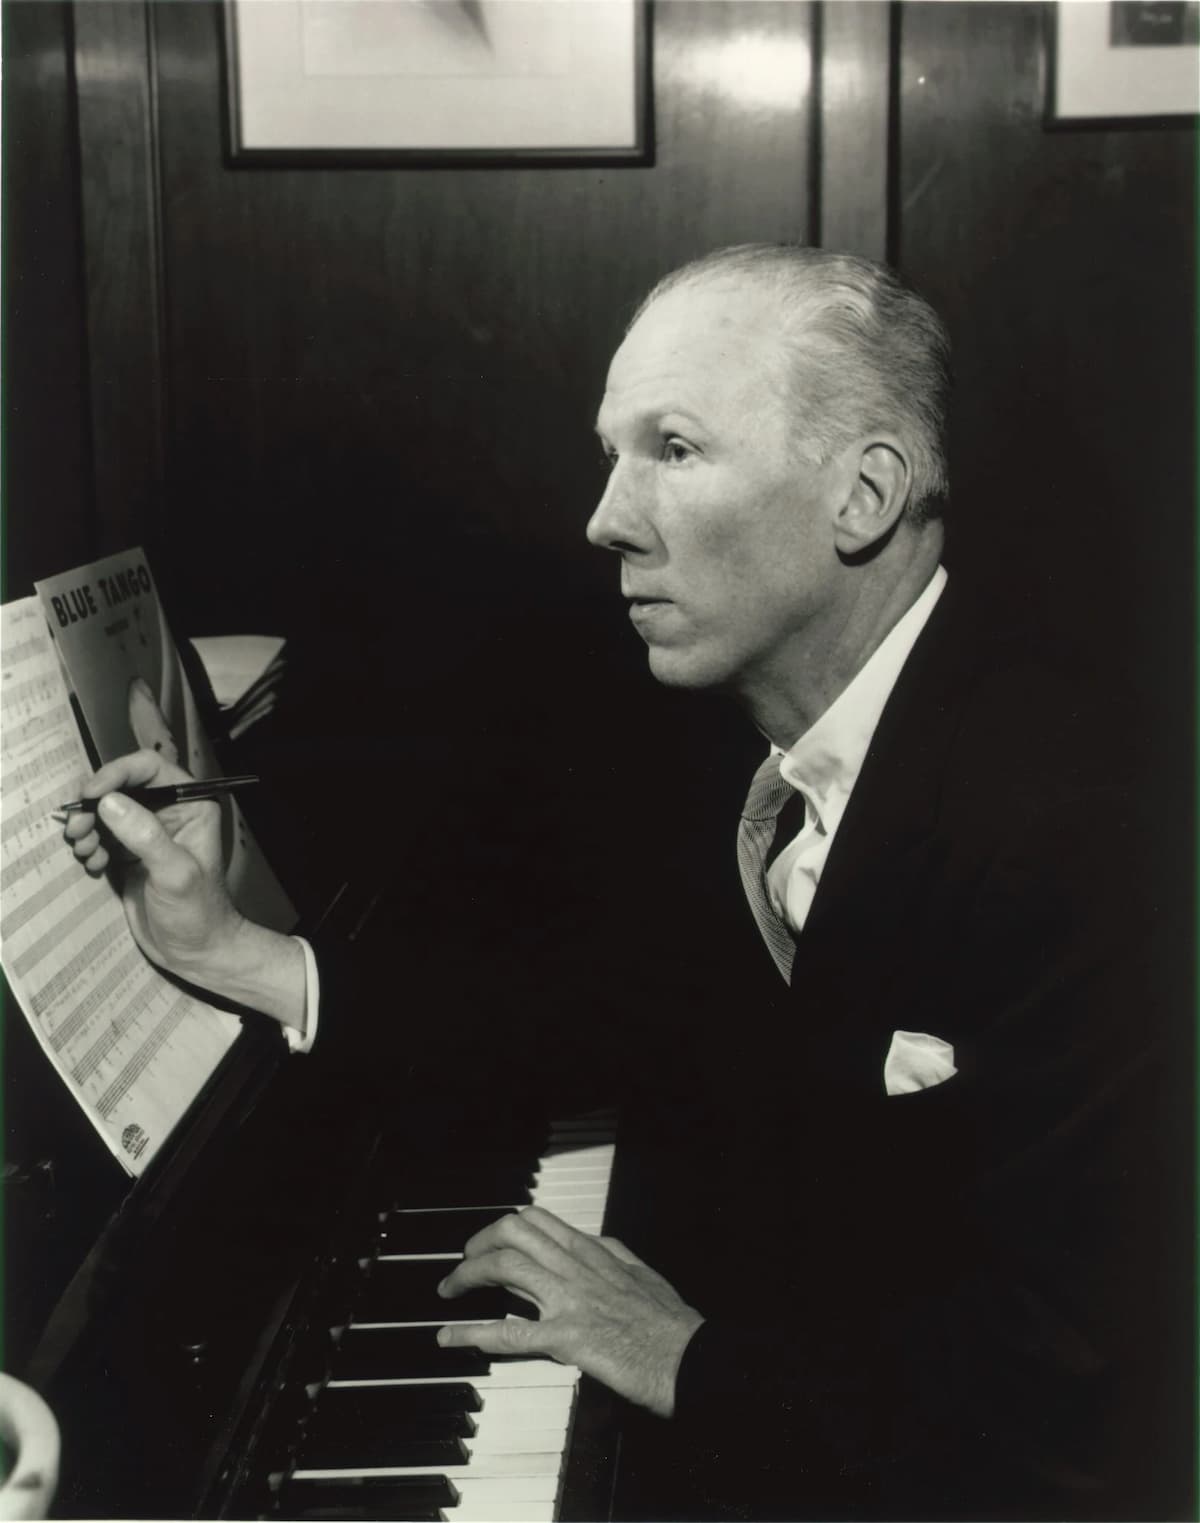 Leroy Anderson composing at the piano